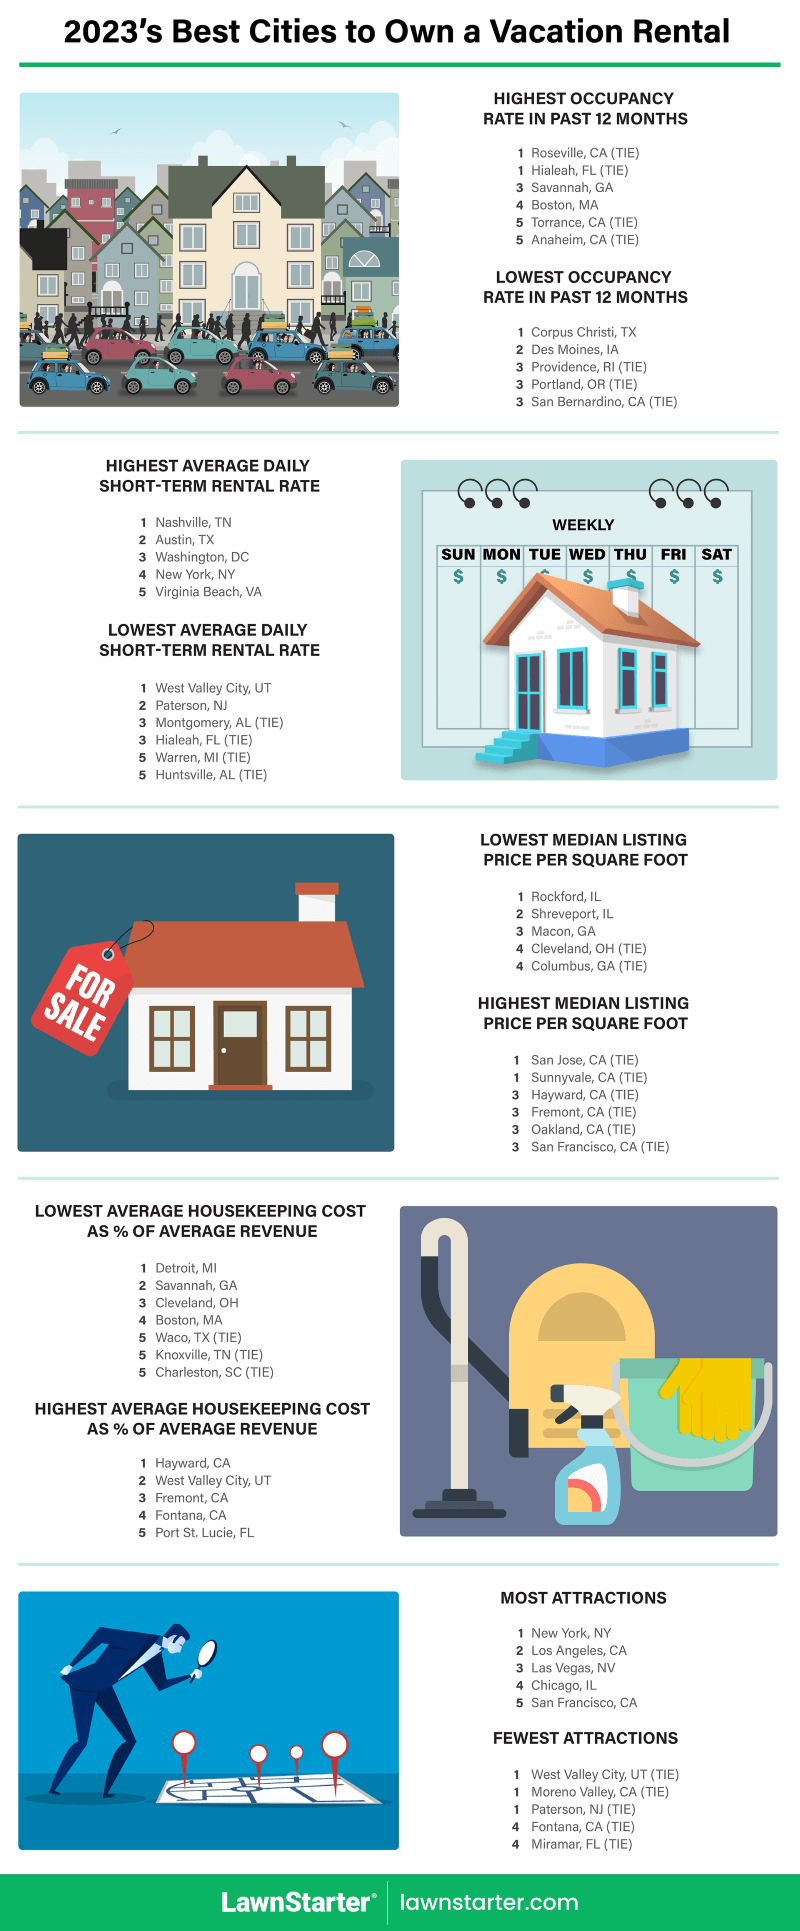 Infographic showing the Best Cities to Own a Vacation Rental, a ranking based on occupancy rates, legal restrictions, revenue potential, and more